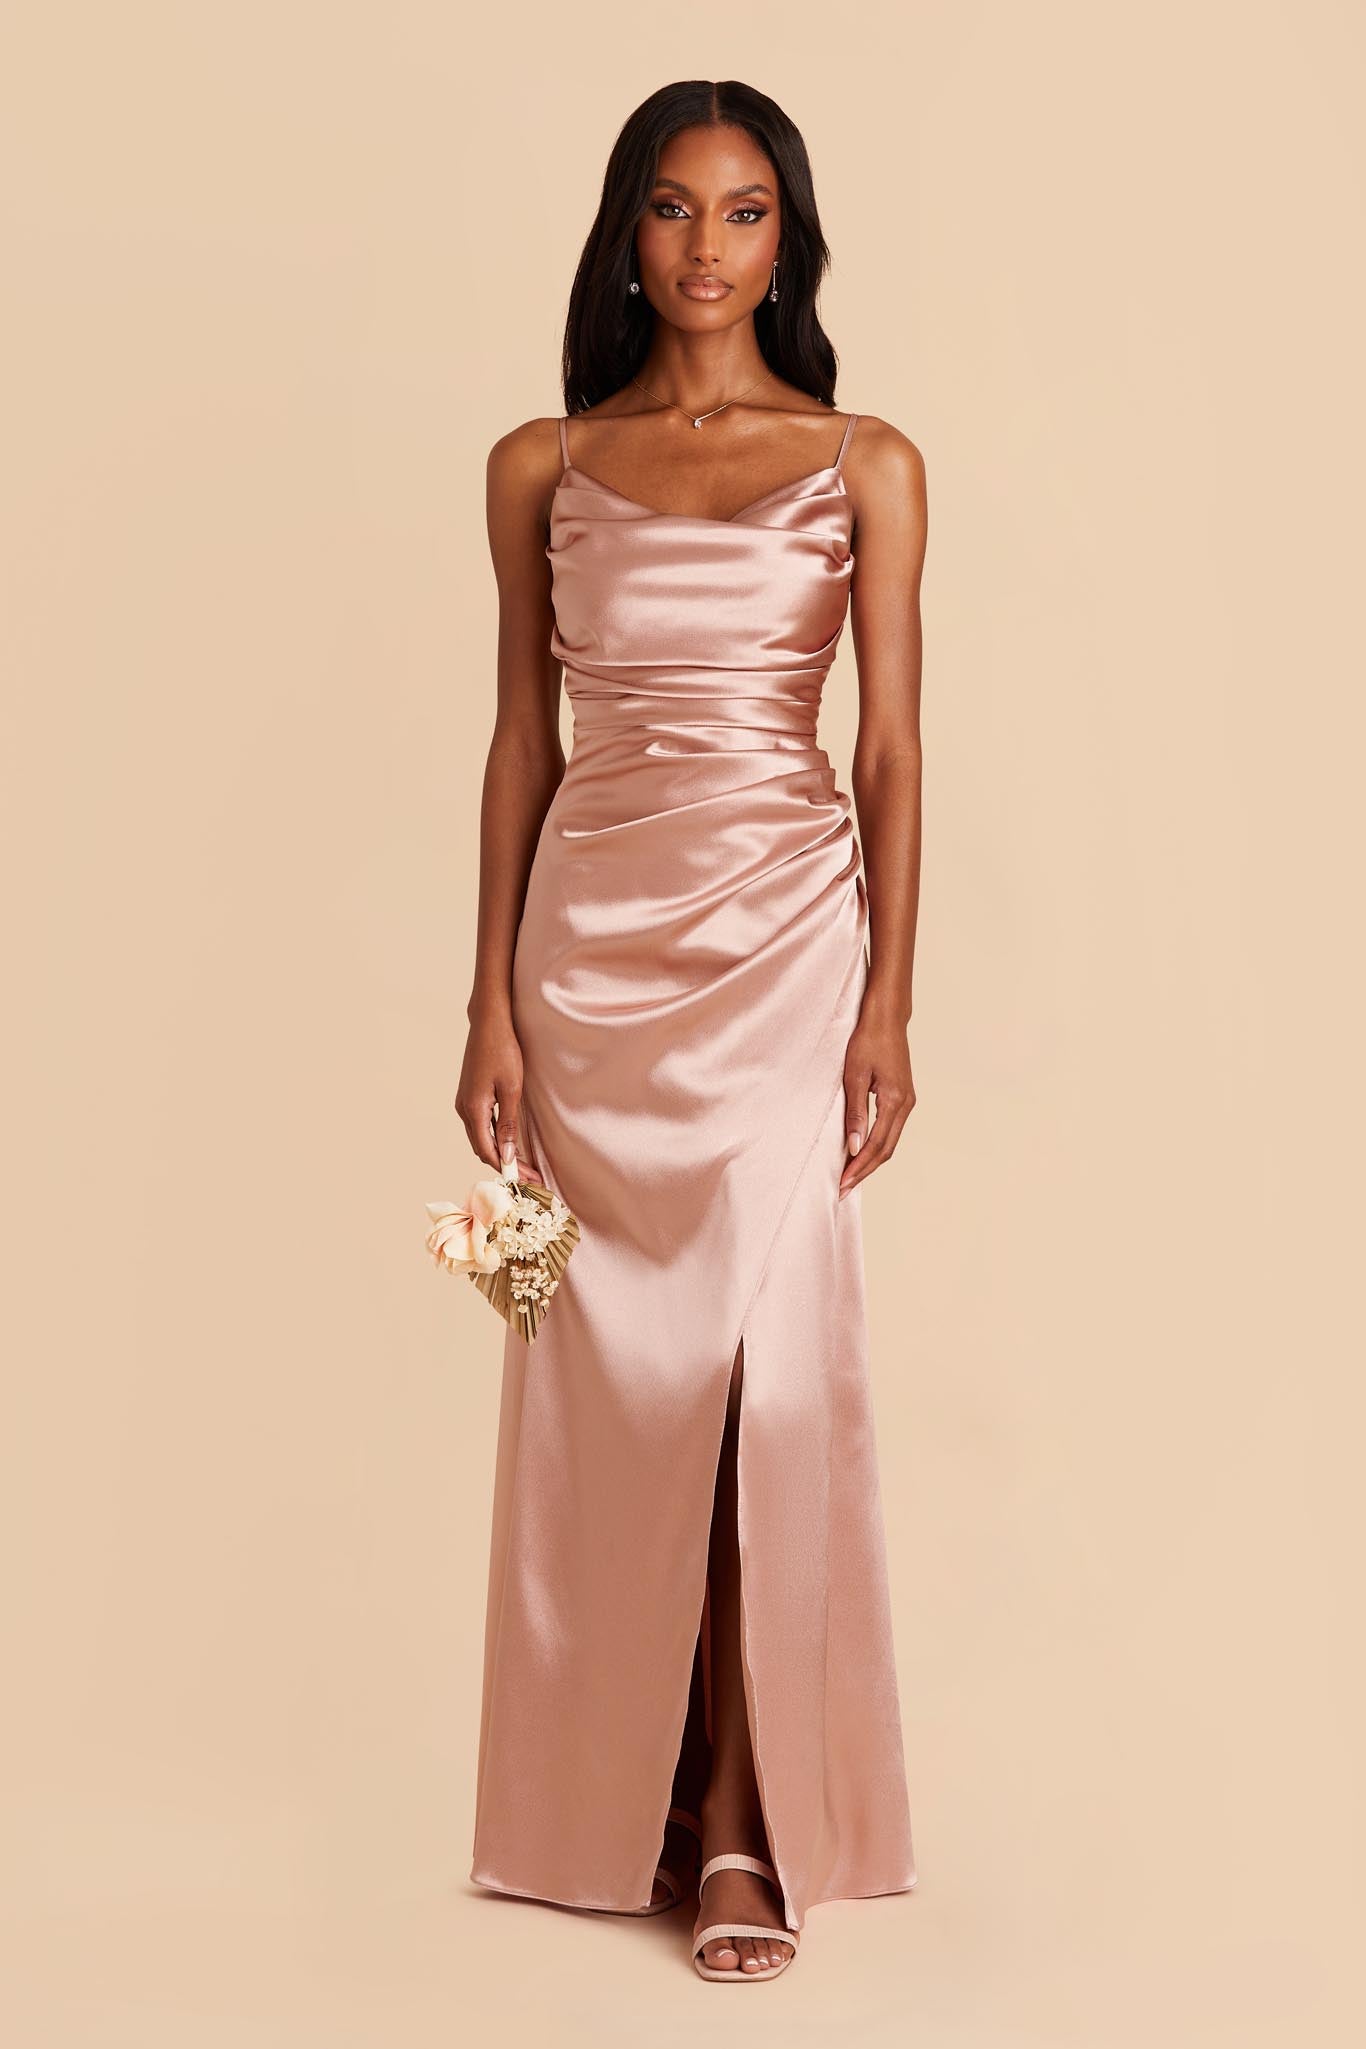 Women's Dresses | Cocktail, Wedding, Casual and More | Melanie Lyne